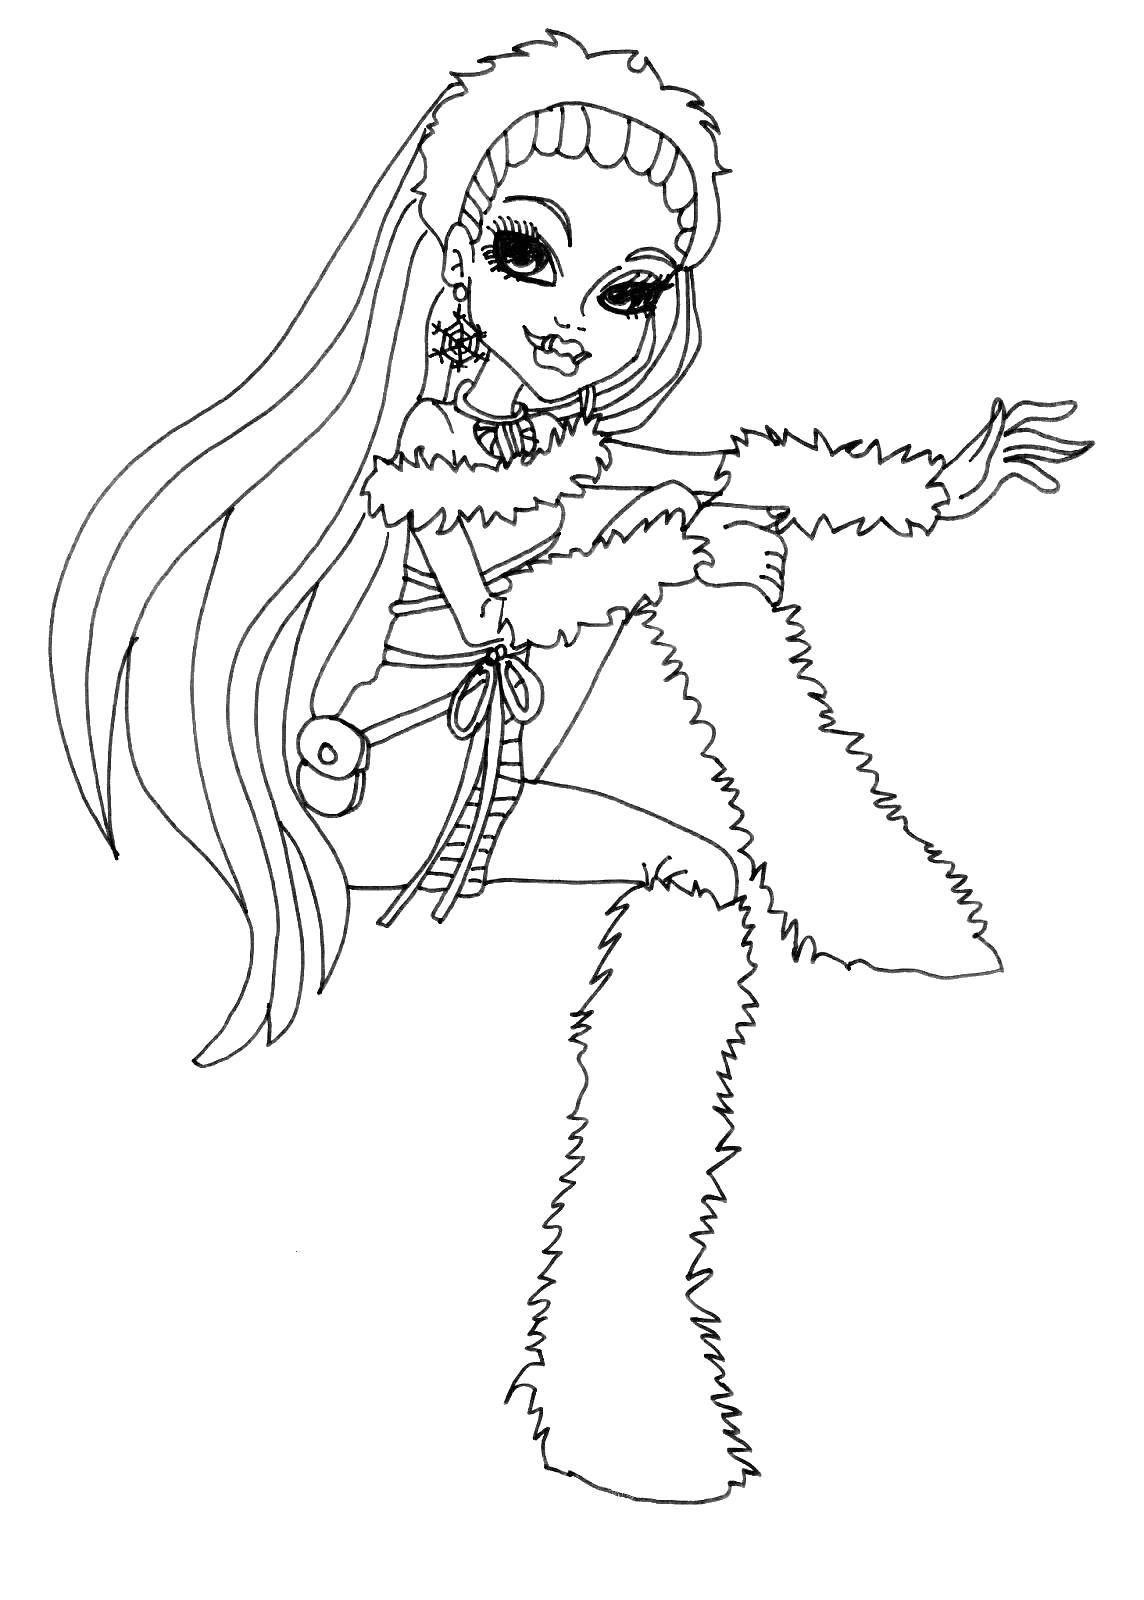 Coloring Character from the animated series. Category monster high. Tags:  Monster High.